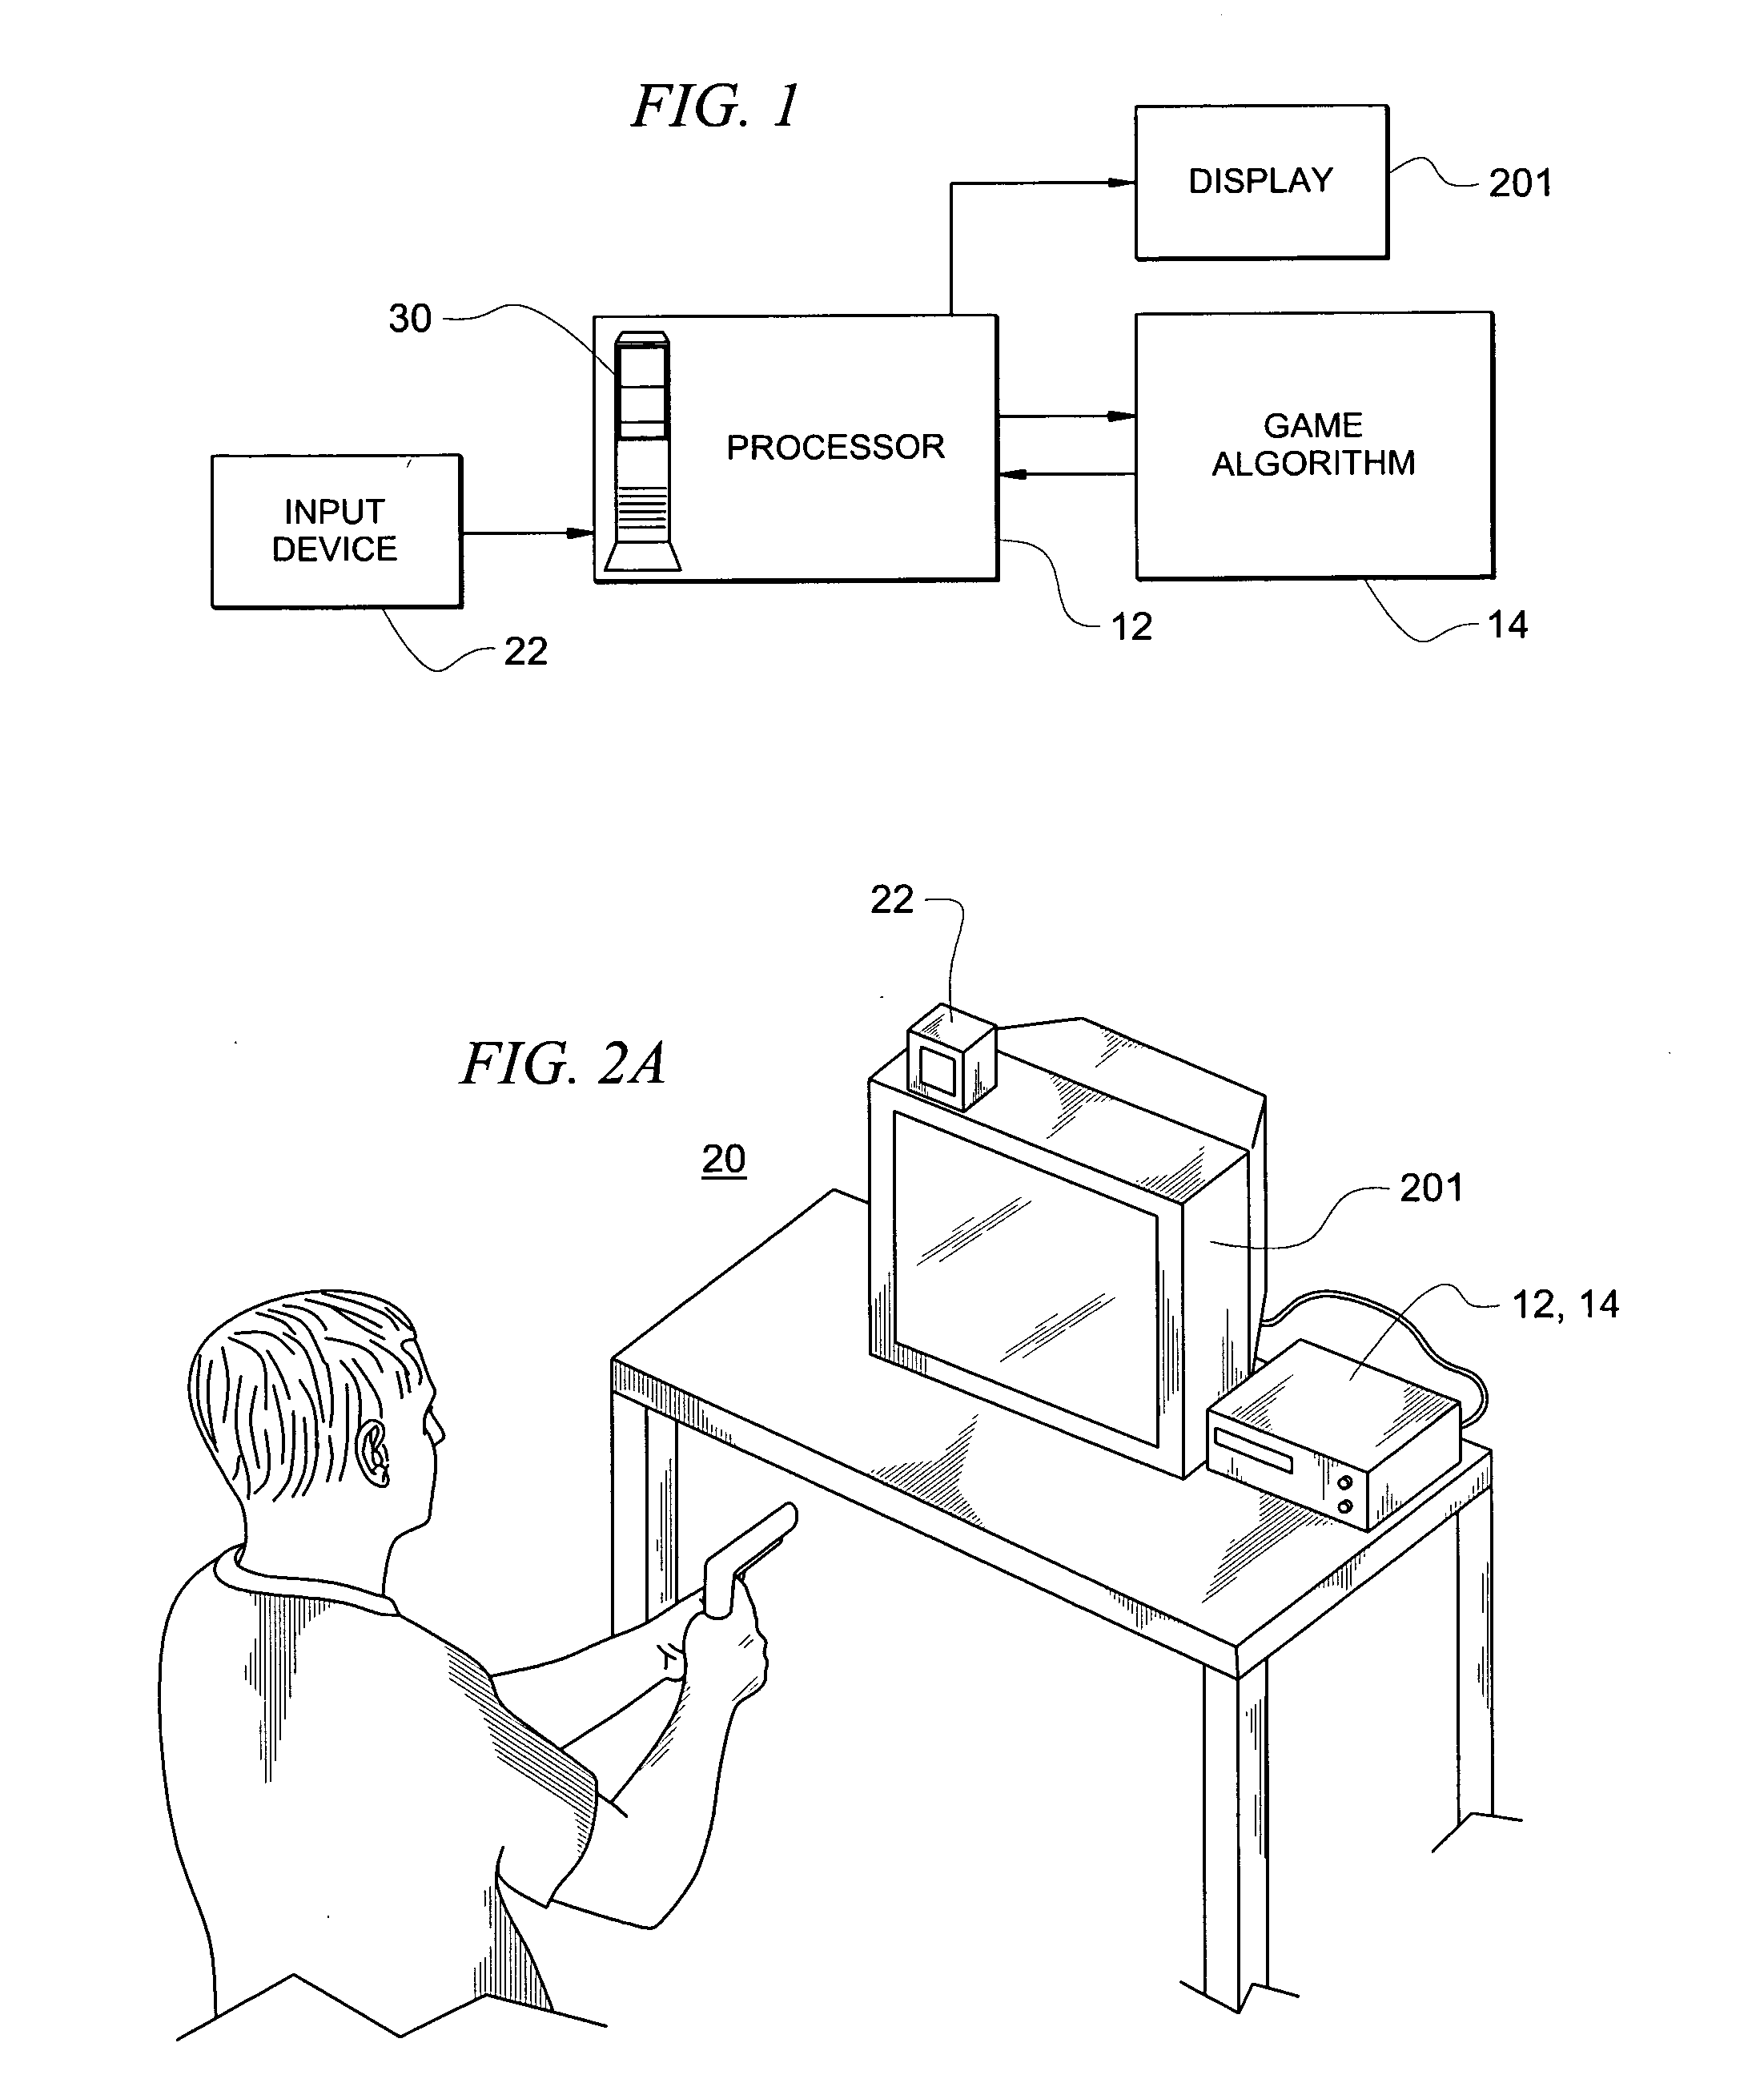 System and method for using image analysis of user interface signals for program control